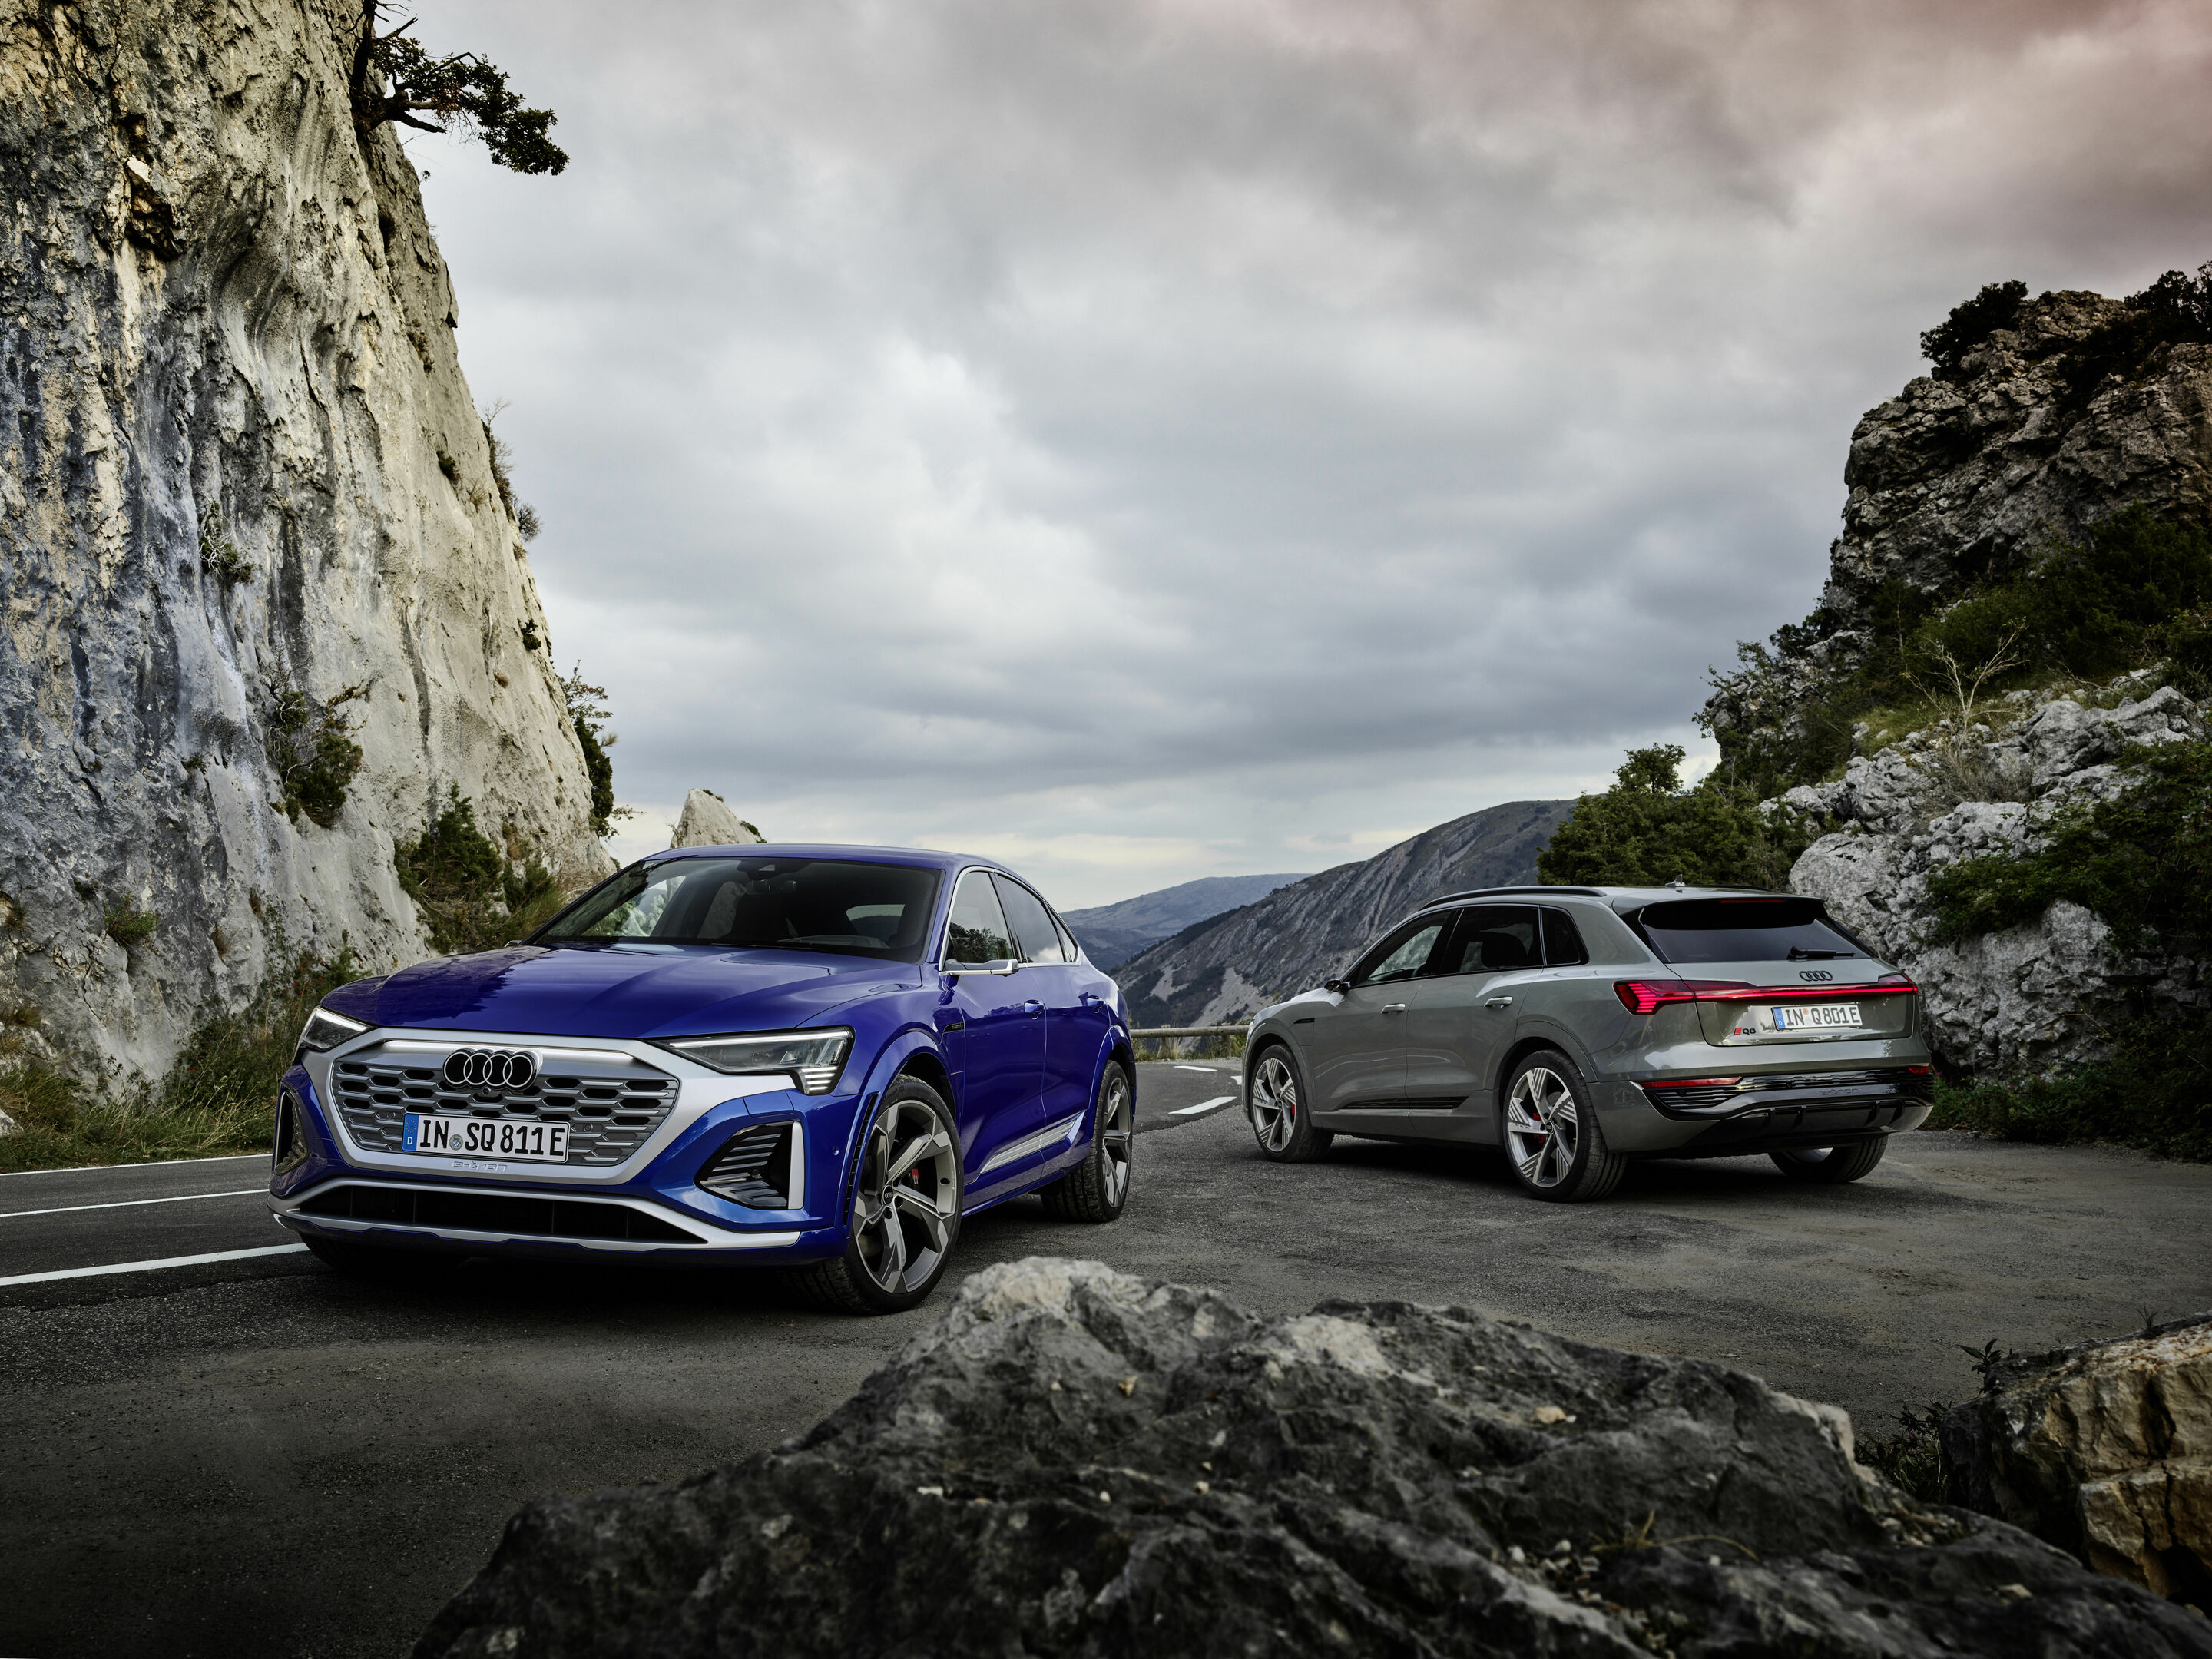 Increased efficiency and range, sharpened design: The new Audi Q8 e-tron